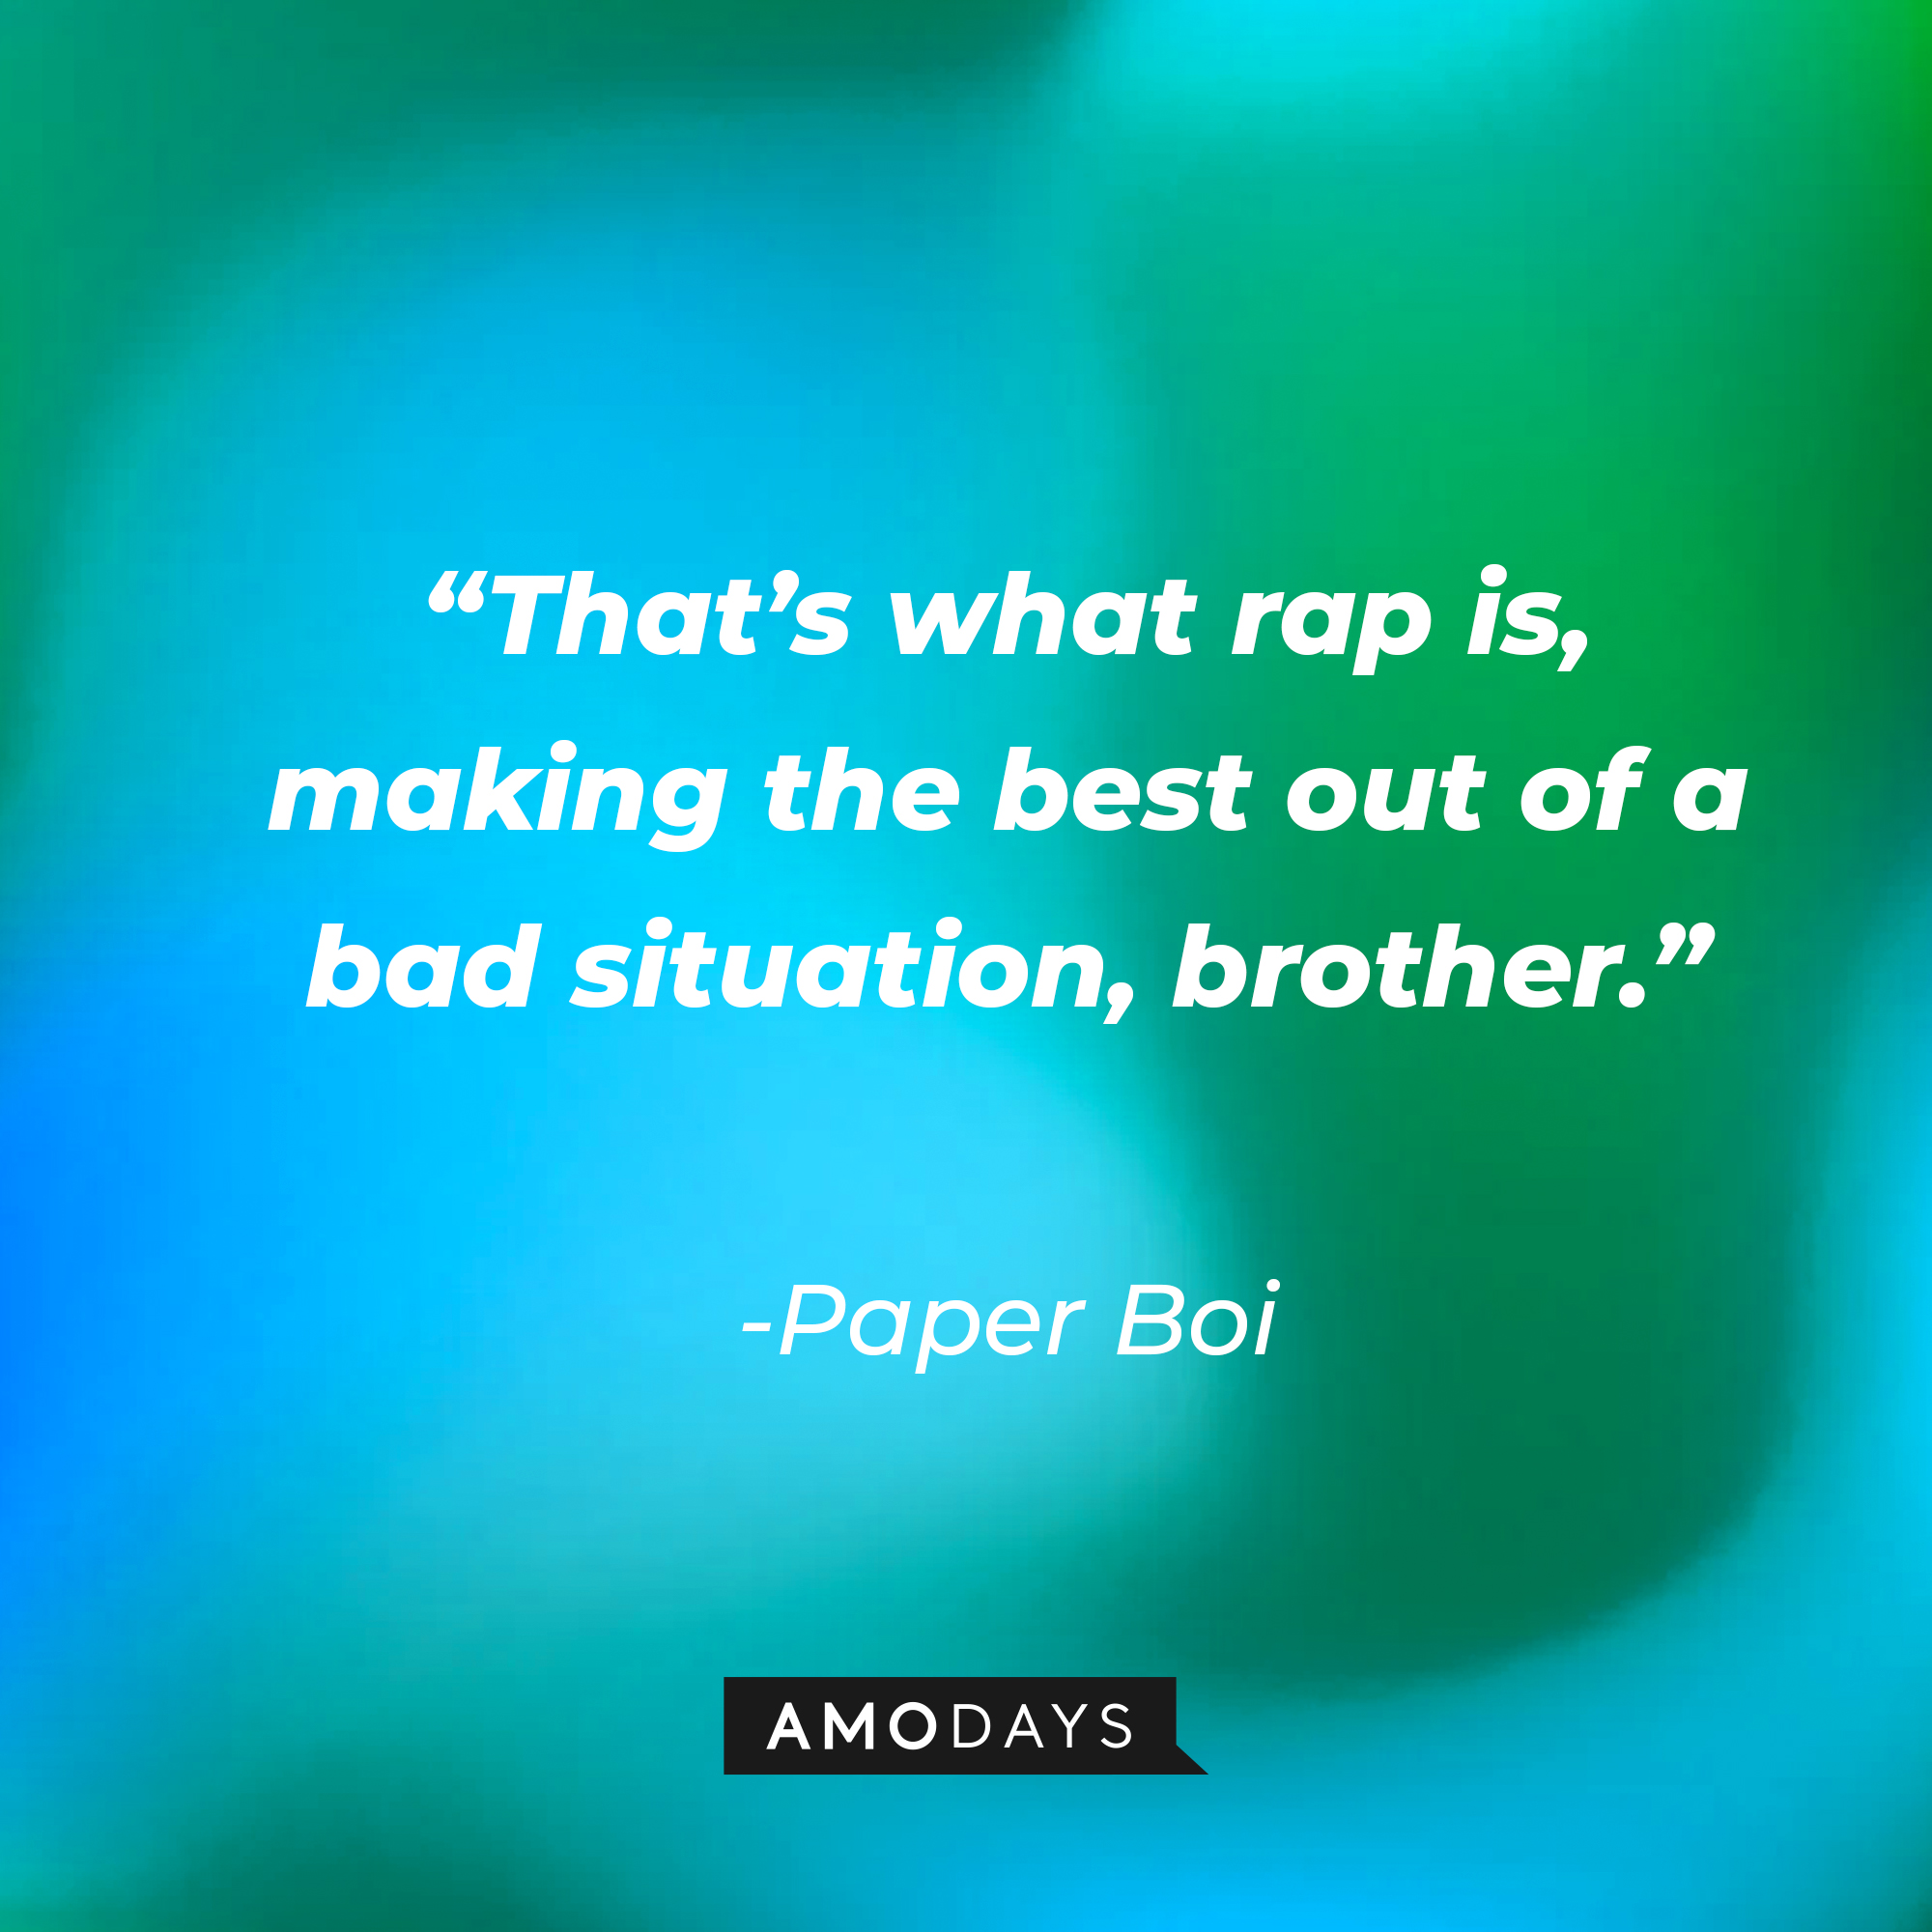 Paper Boi’s quote: “That’s what rap is, making the best out of a bad situation, brother.” | Source: AmoDays